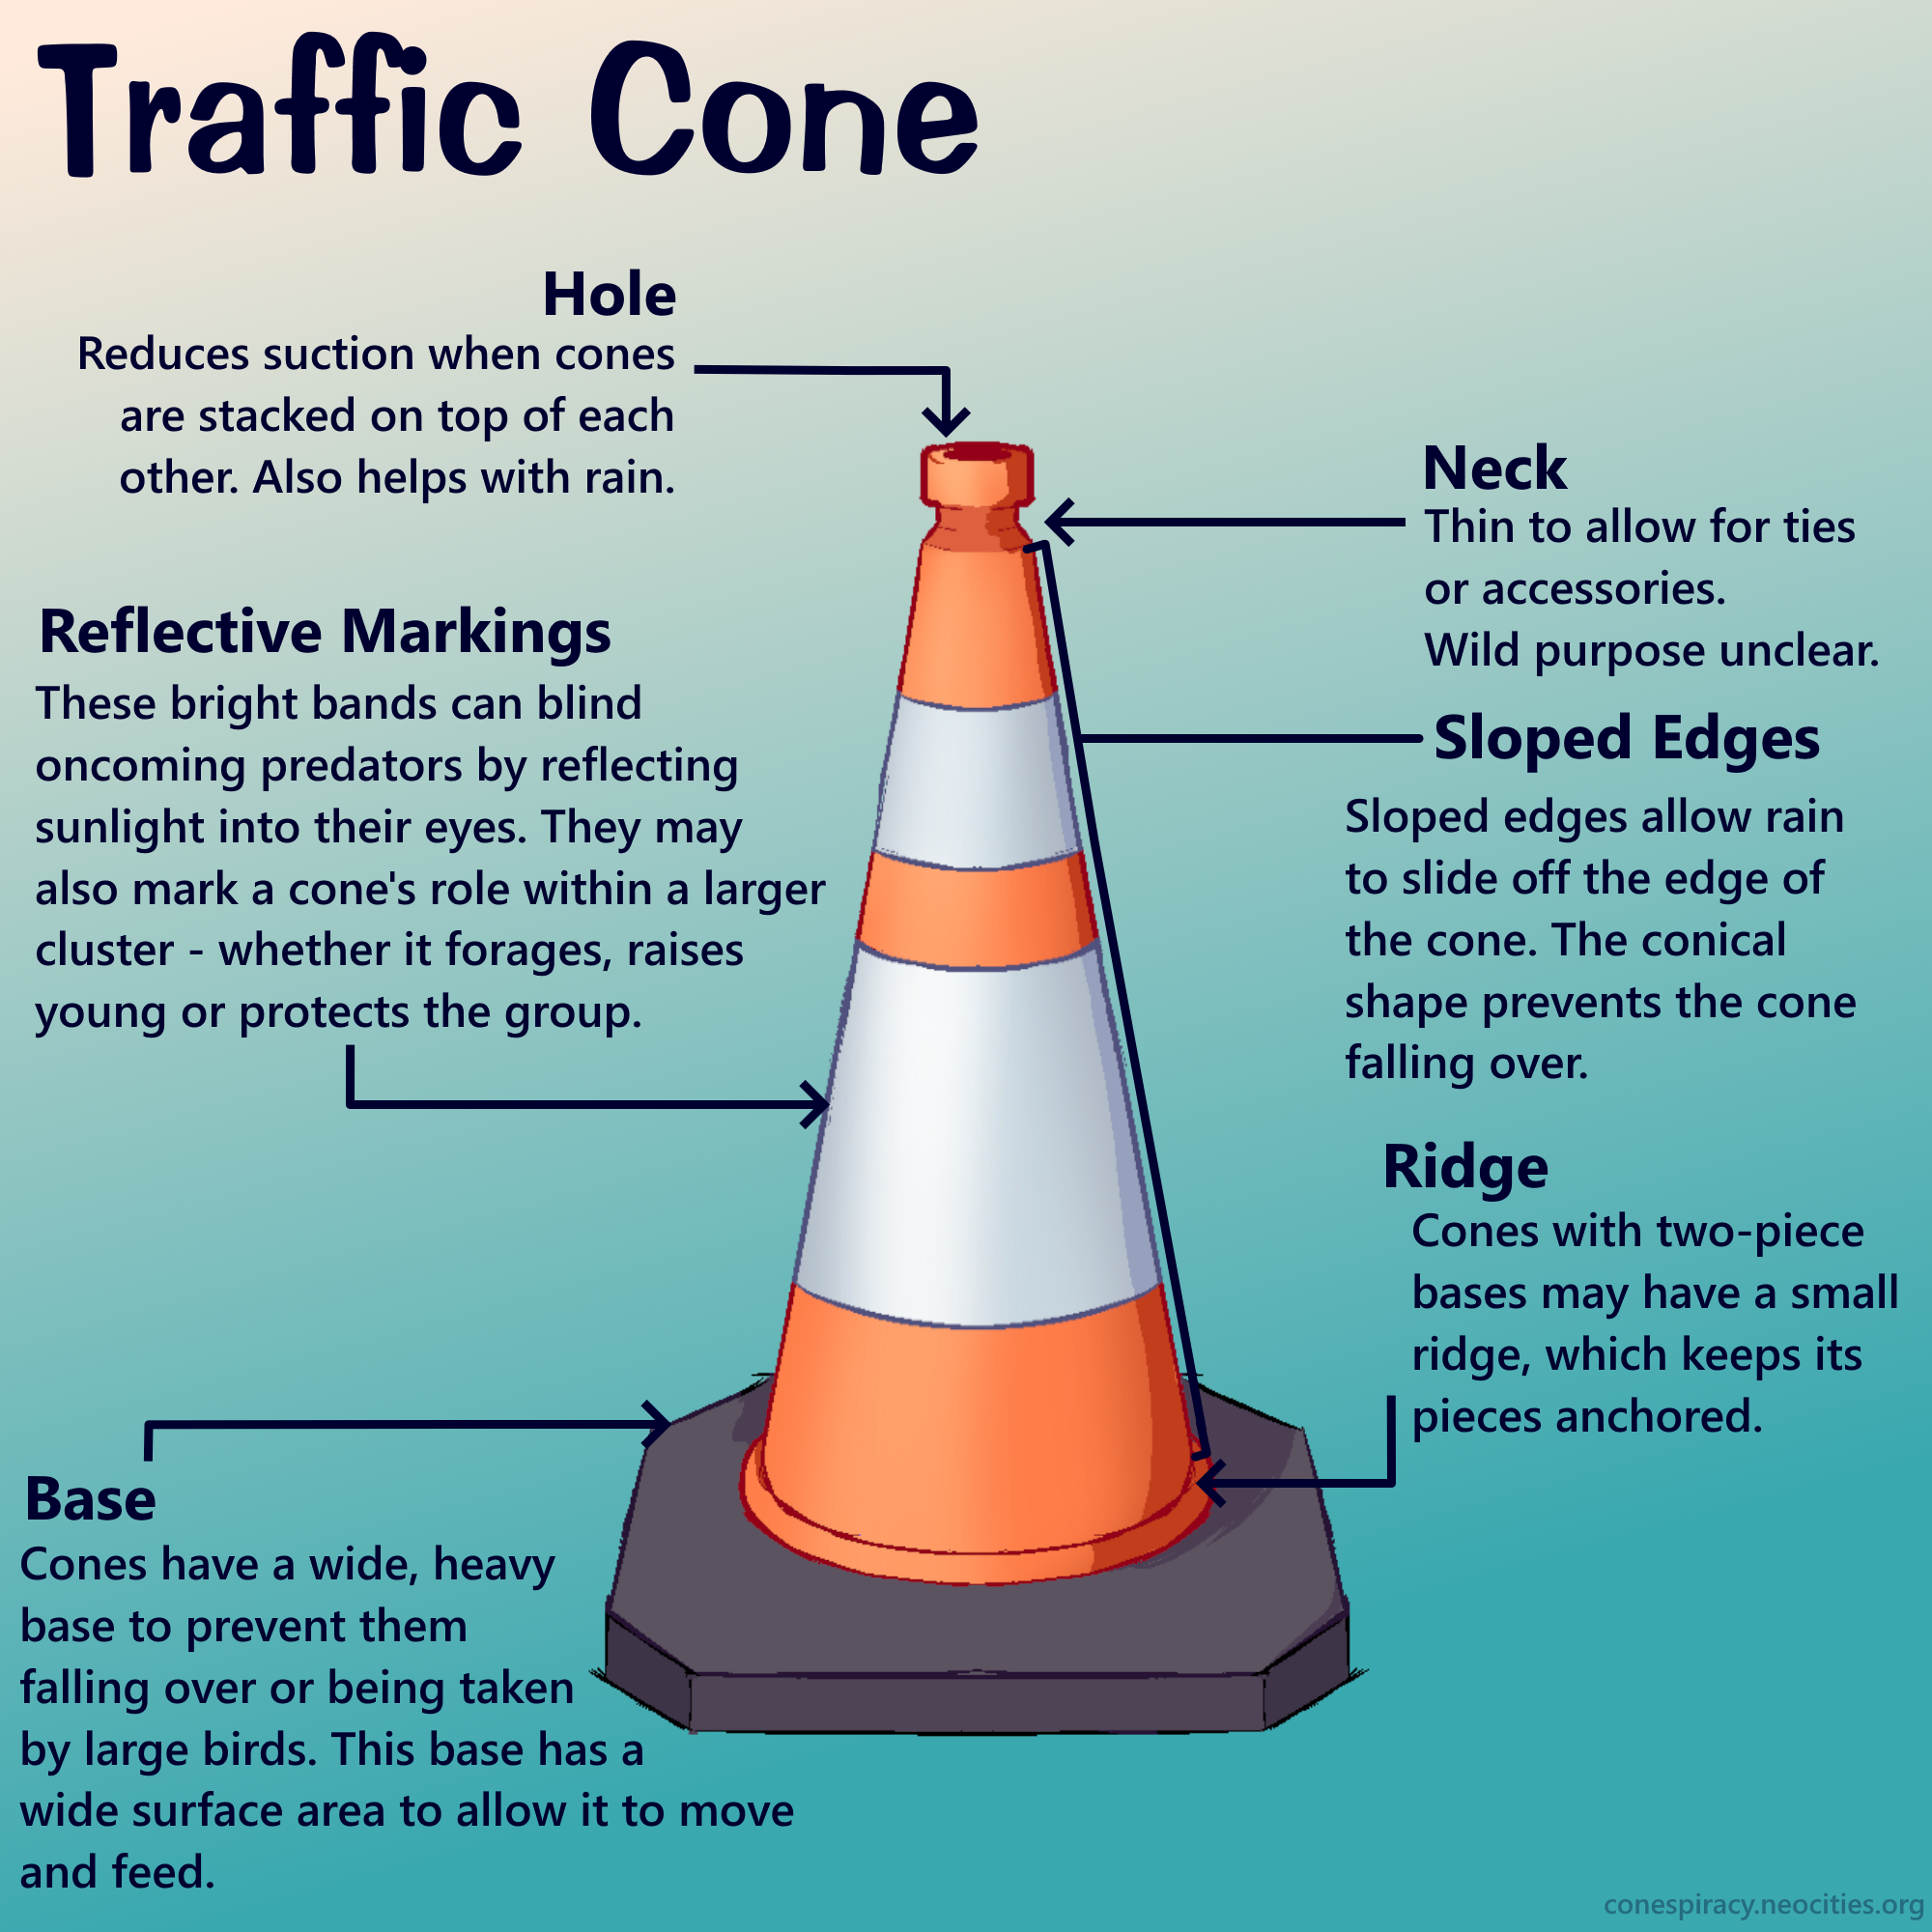 detailed diagram of traffic cone. all written information in the image is otherwise available on the page.